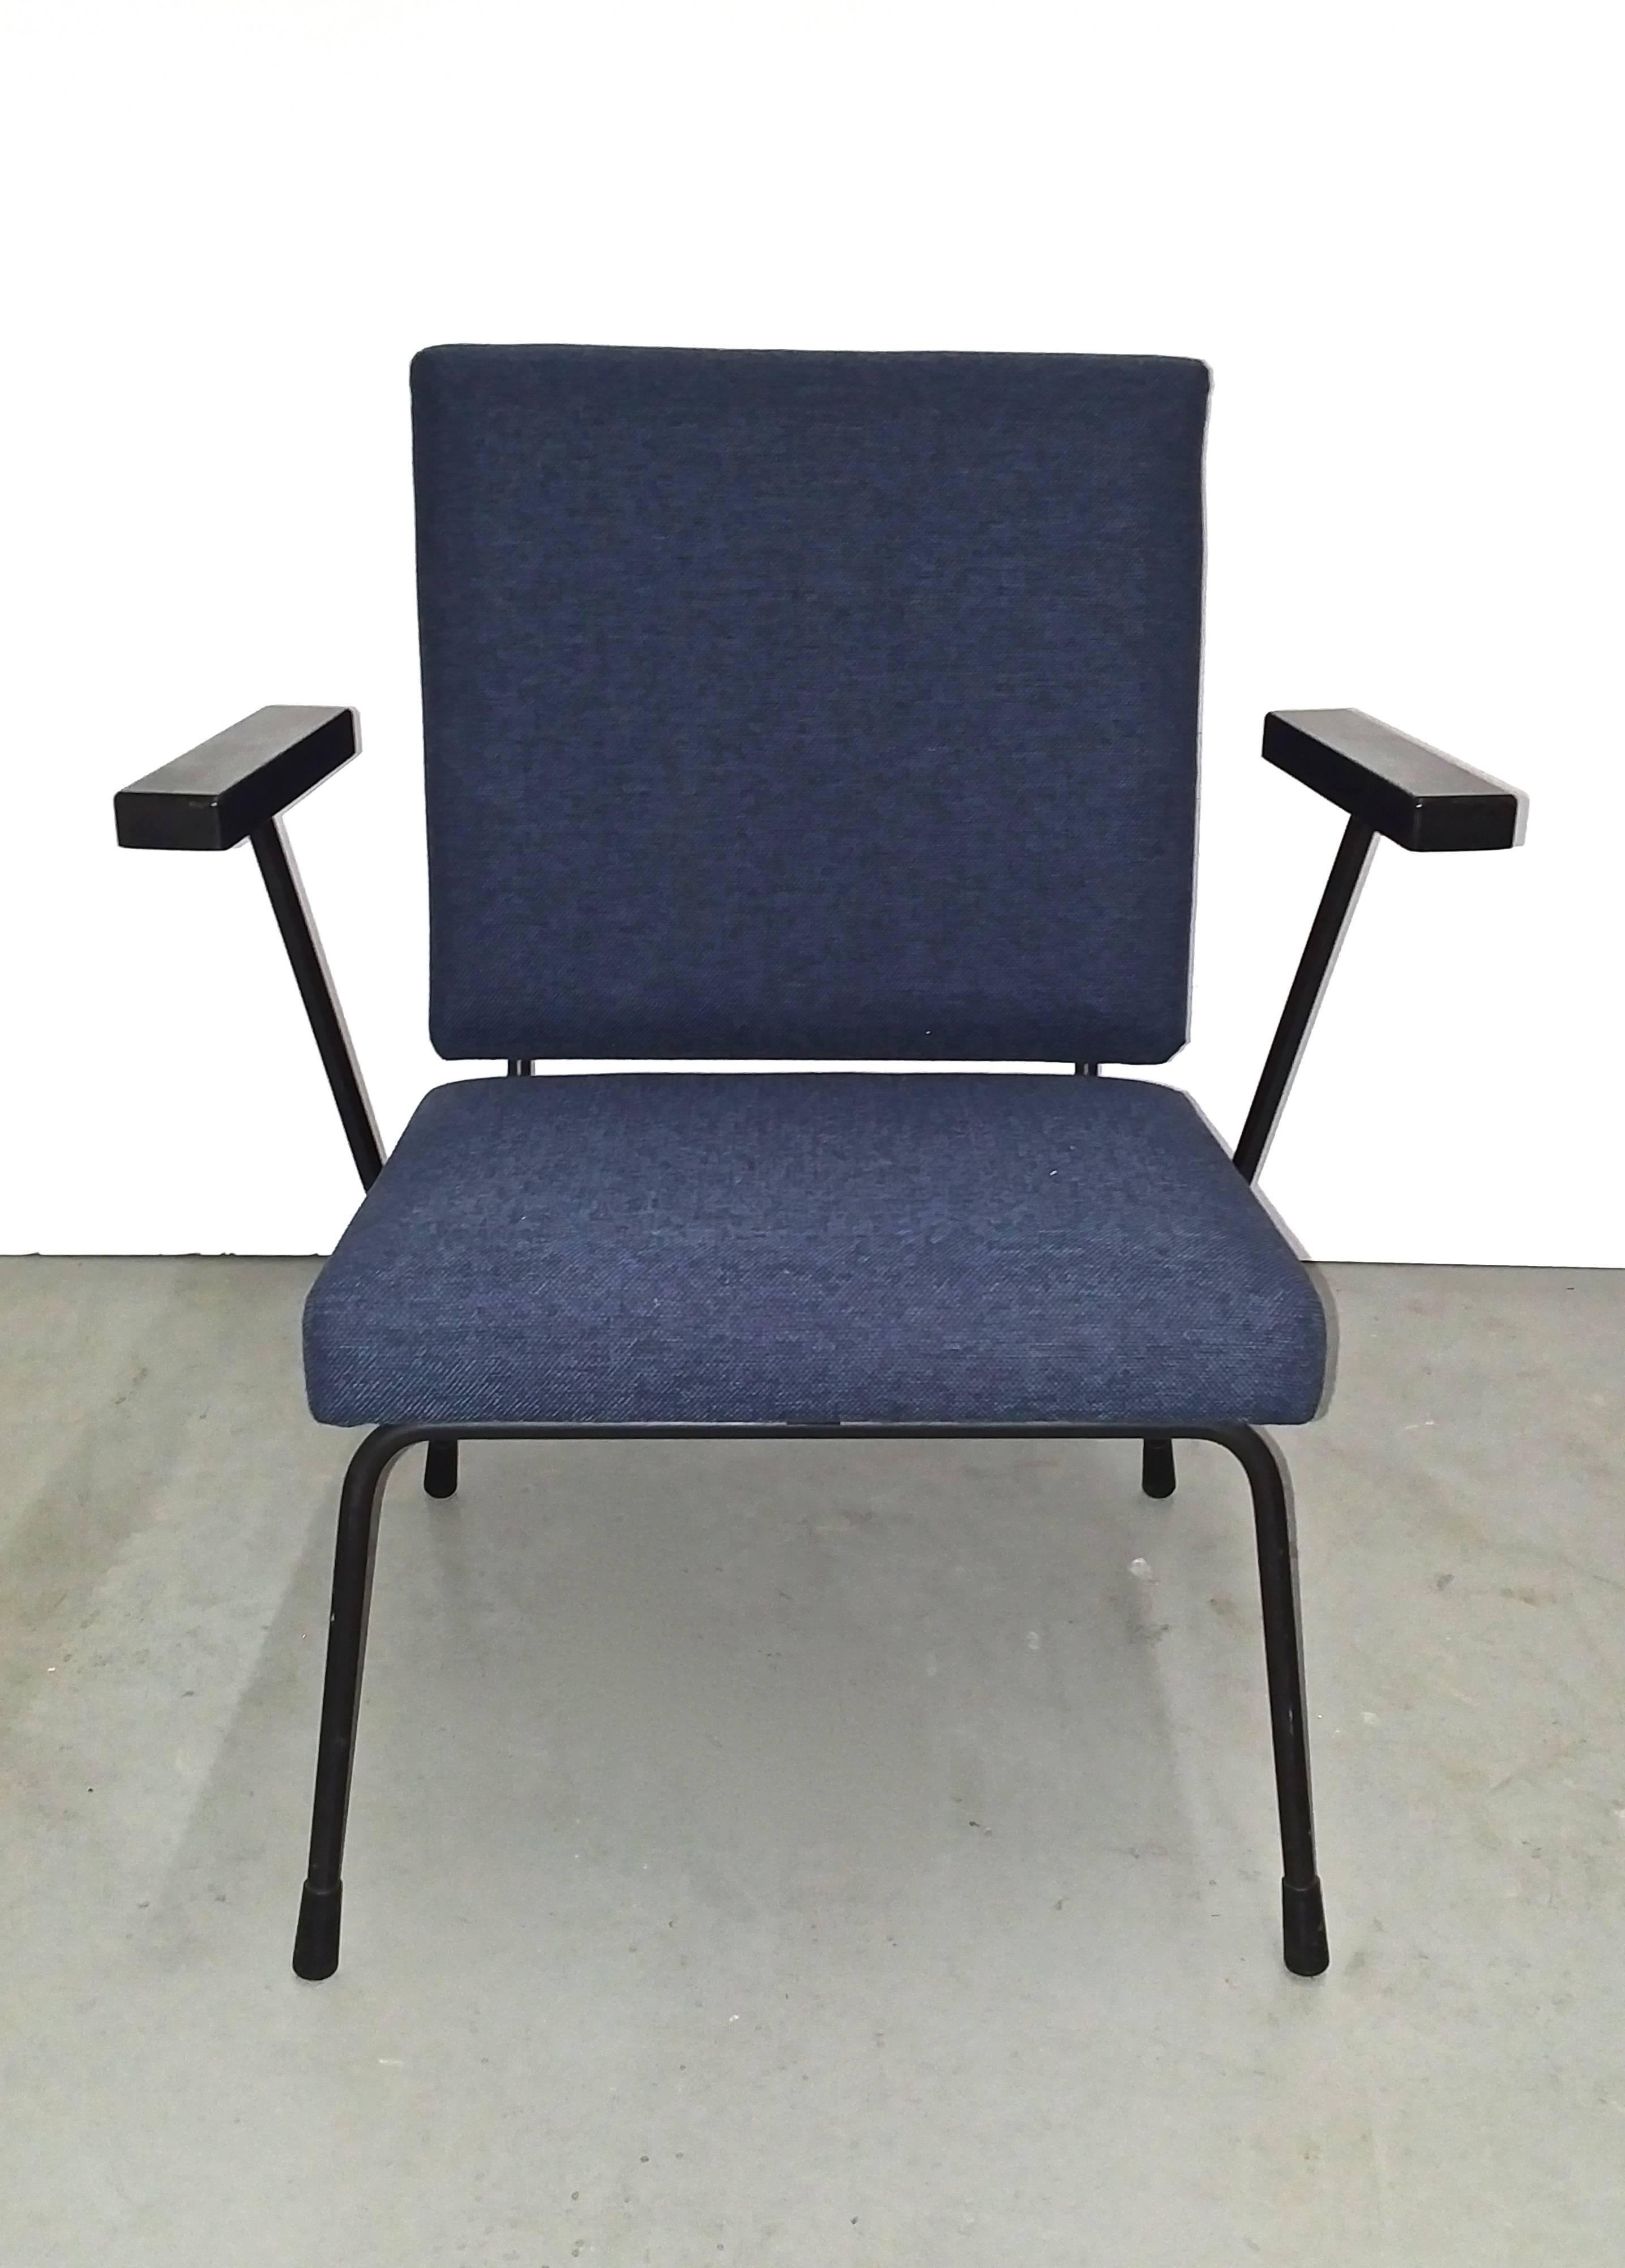 This Classic 1407 chair was designed in 1957 by Willem Rietveld and Andre Cordemeyer for Gispen, The Netherlands. It features blue Kvadrat upholstery, a black metal frame, and Bakelite armrests.